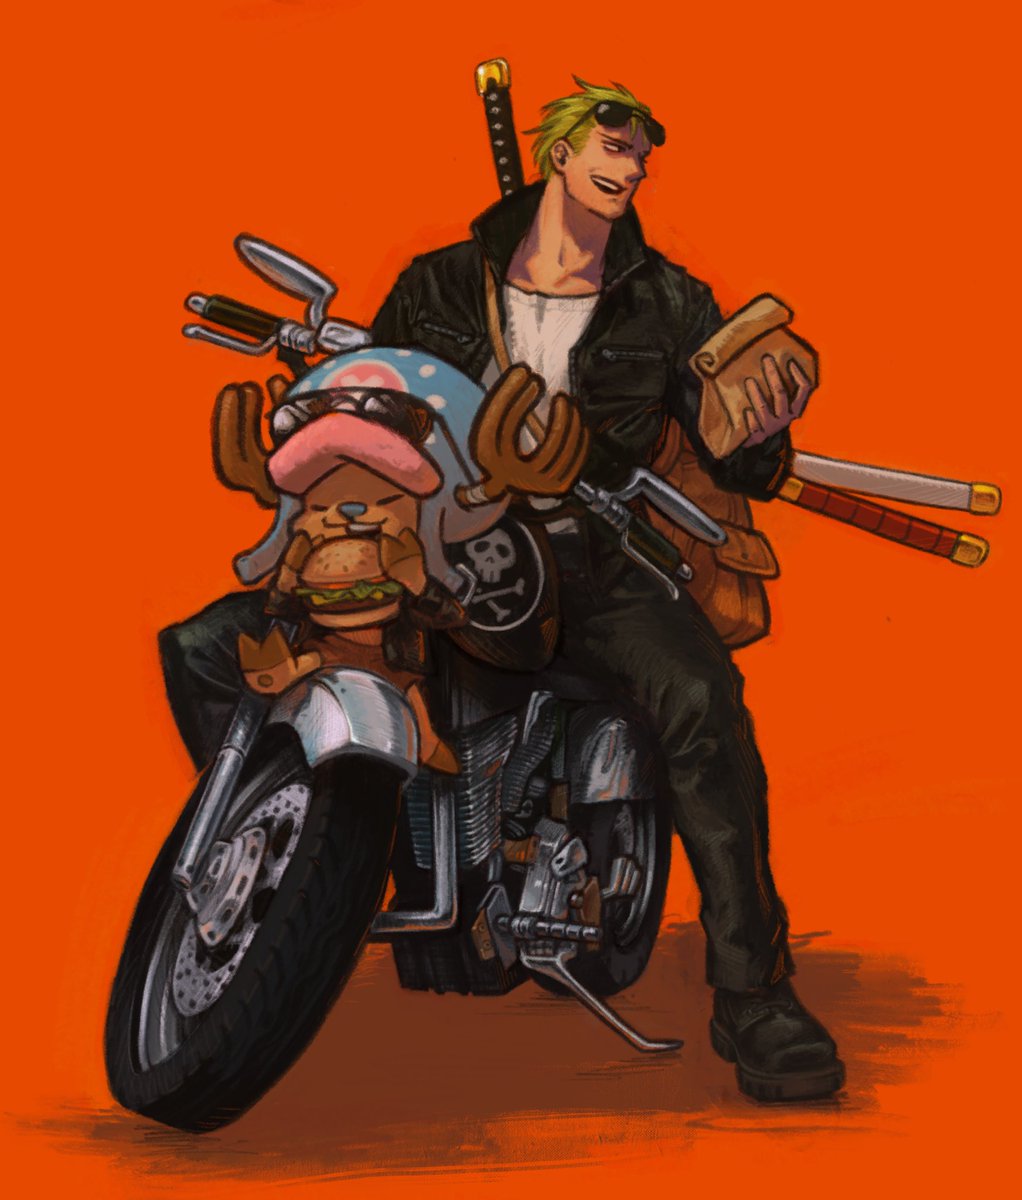 Zoro and chopper go to White Castle to the movie